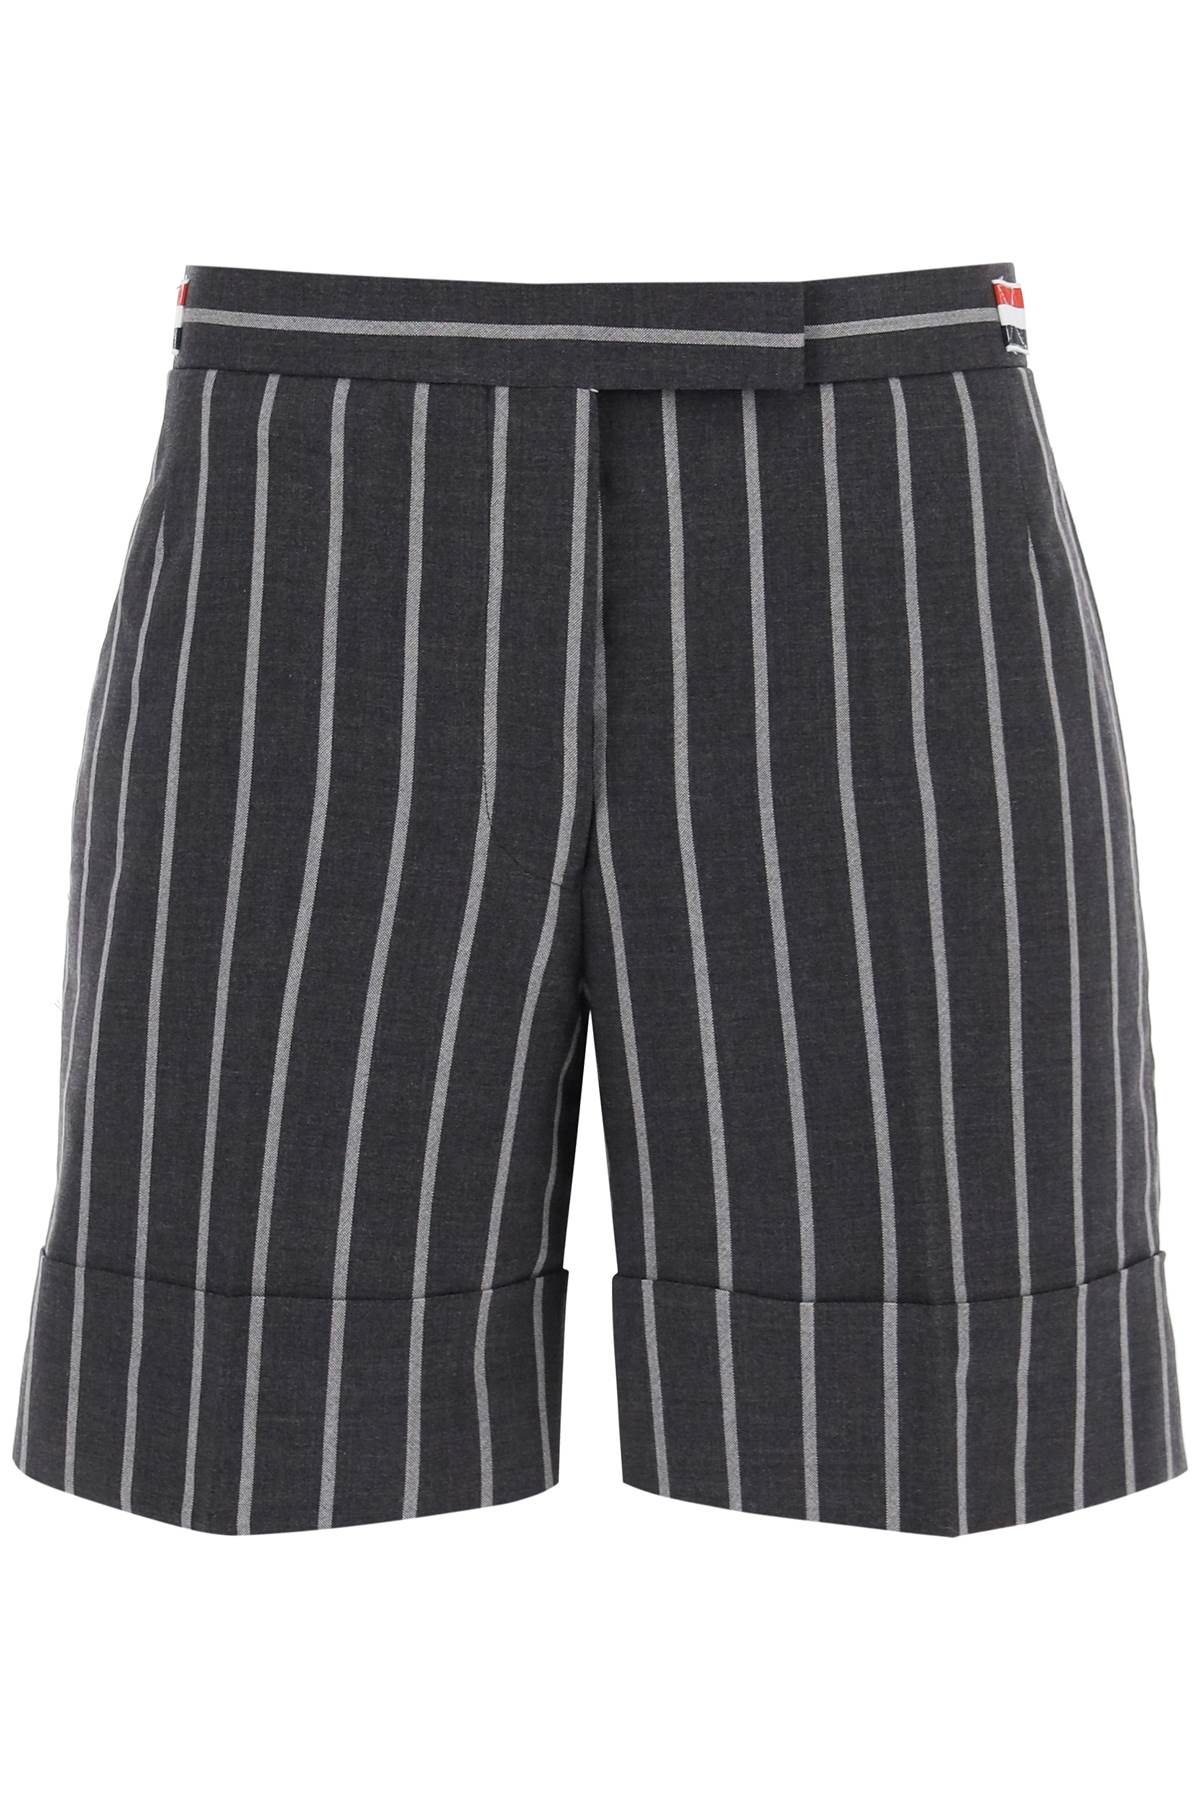 Thom browne striped tailoring shorts-0